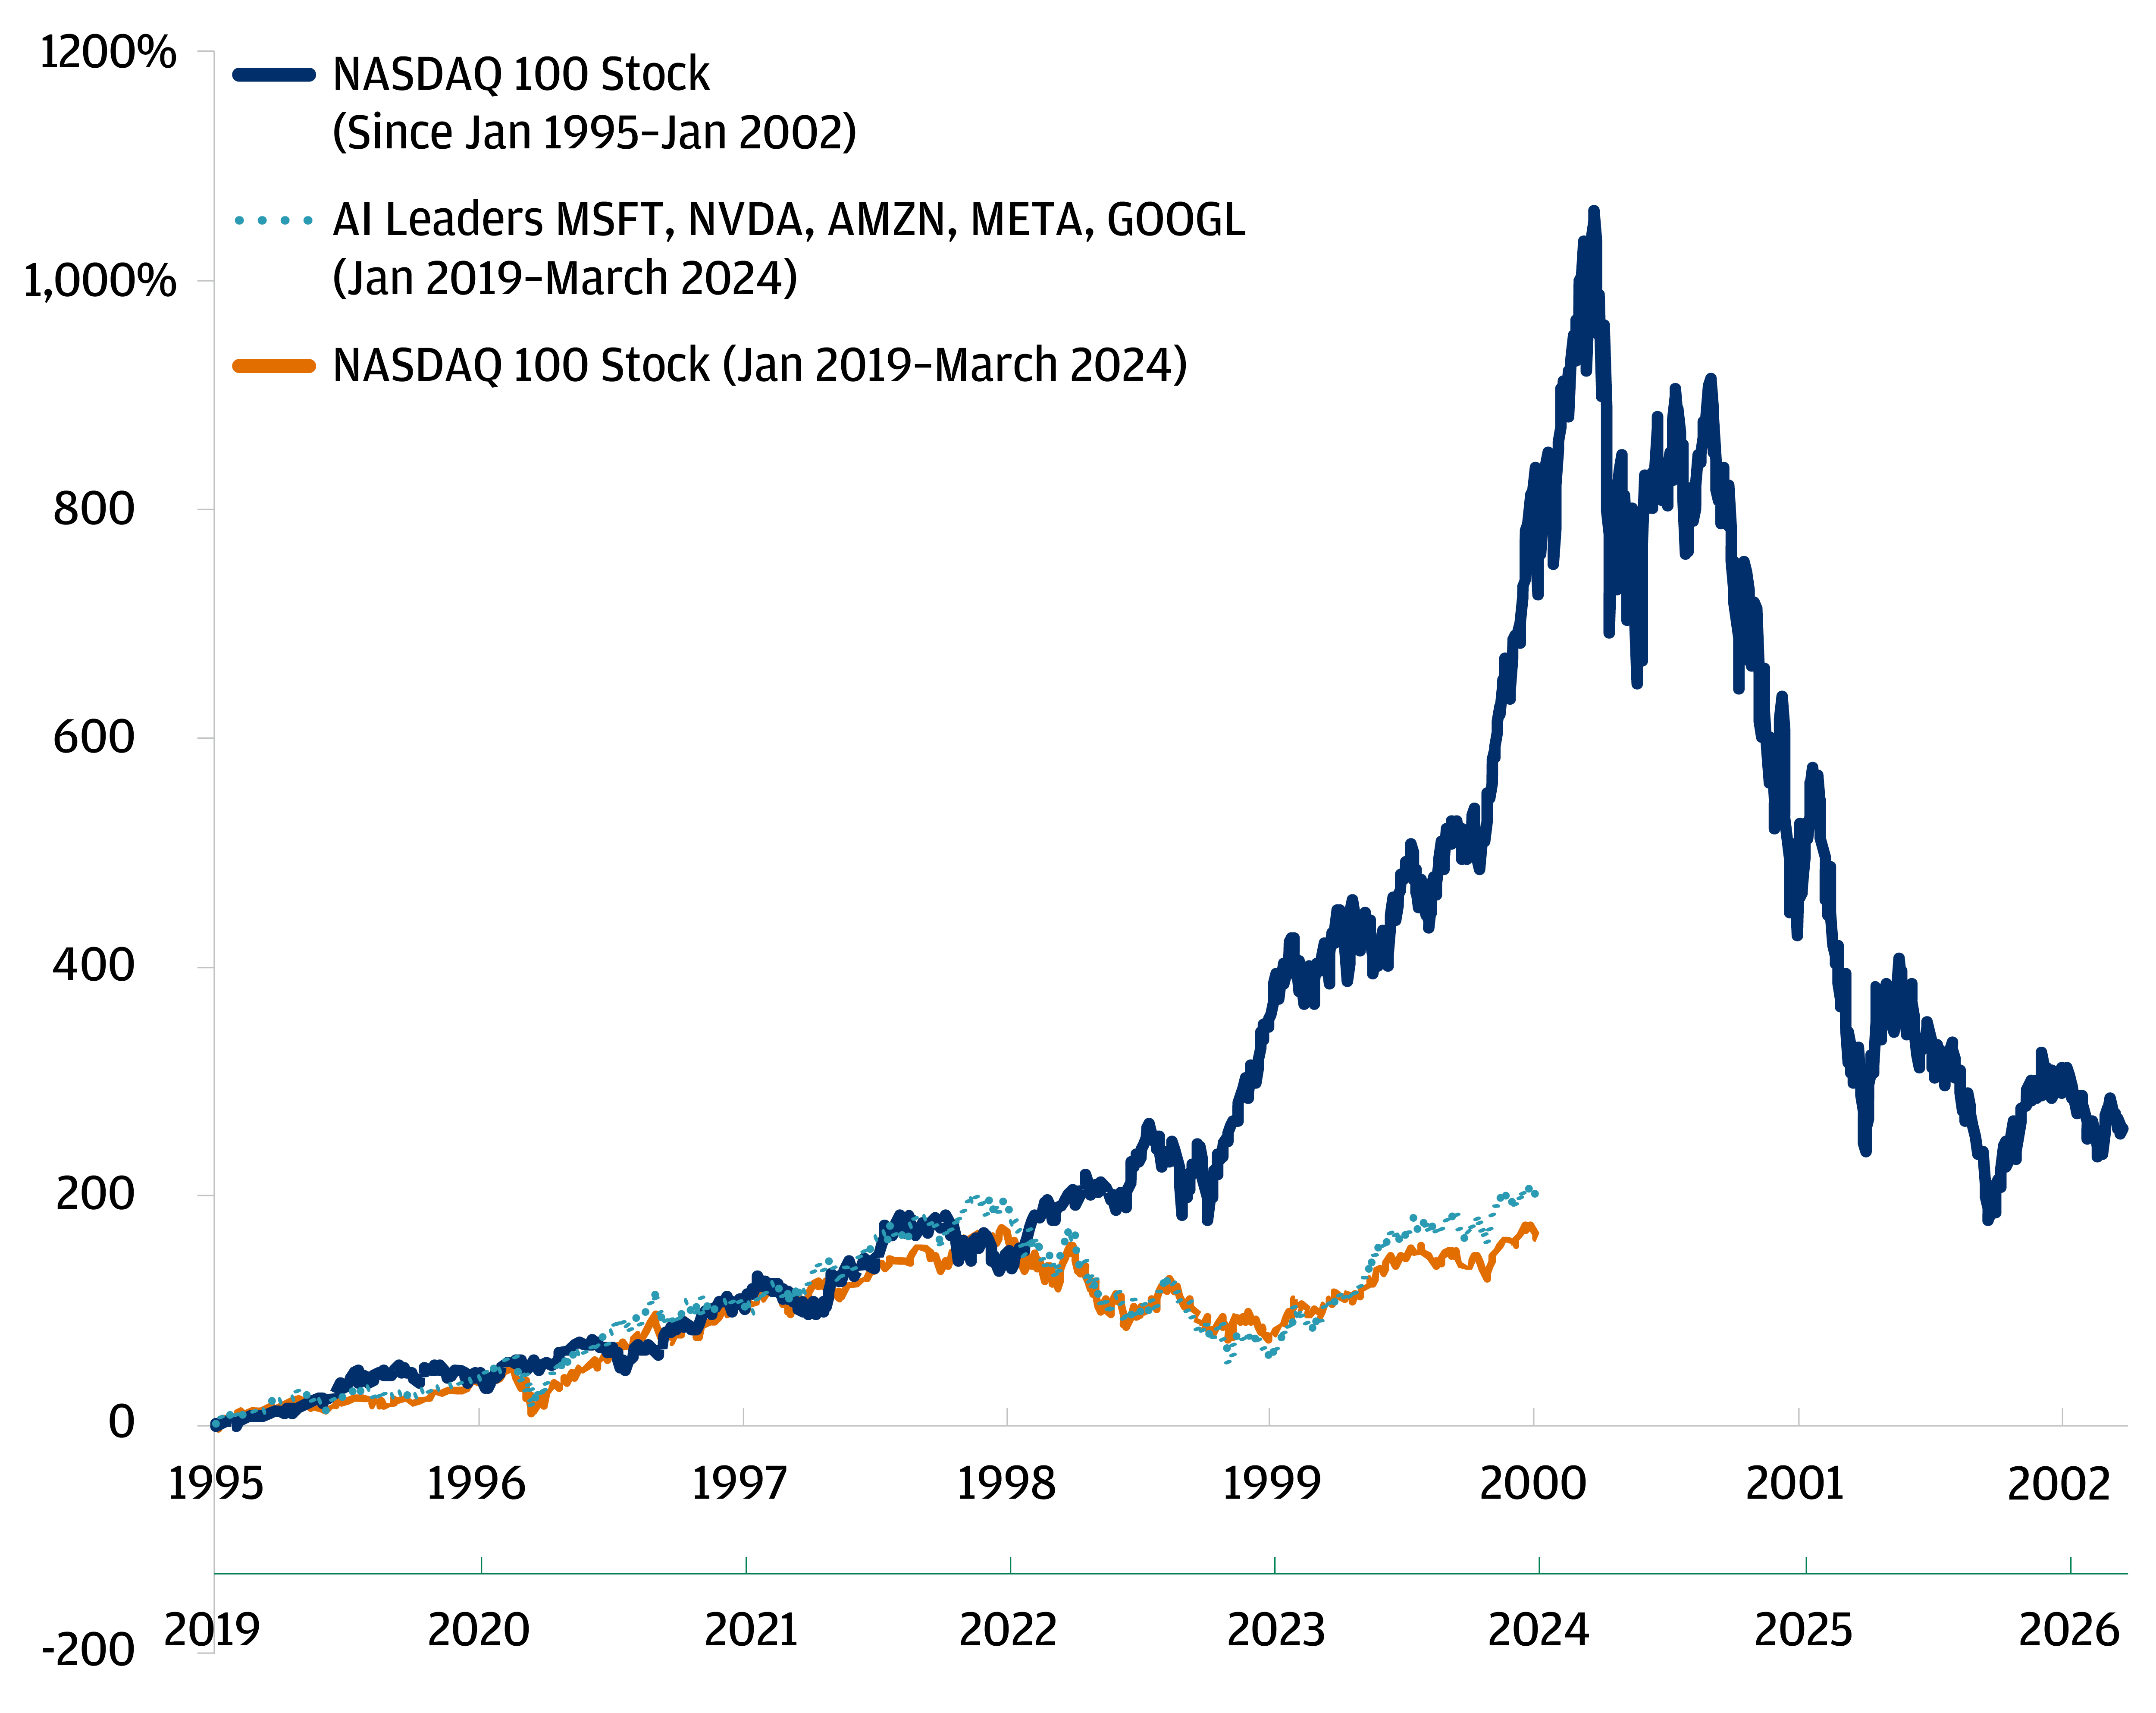 This graph overlays the price performance of the Nasdaq 100 Index from 1995 to 2002 and the price performance of the Nasdaq 100 and today's AI leaders since 2019. On this basis, we don’t see today's AI leaders having reached unreasonable price levels. 